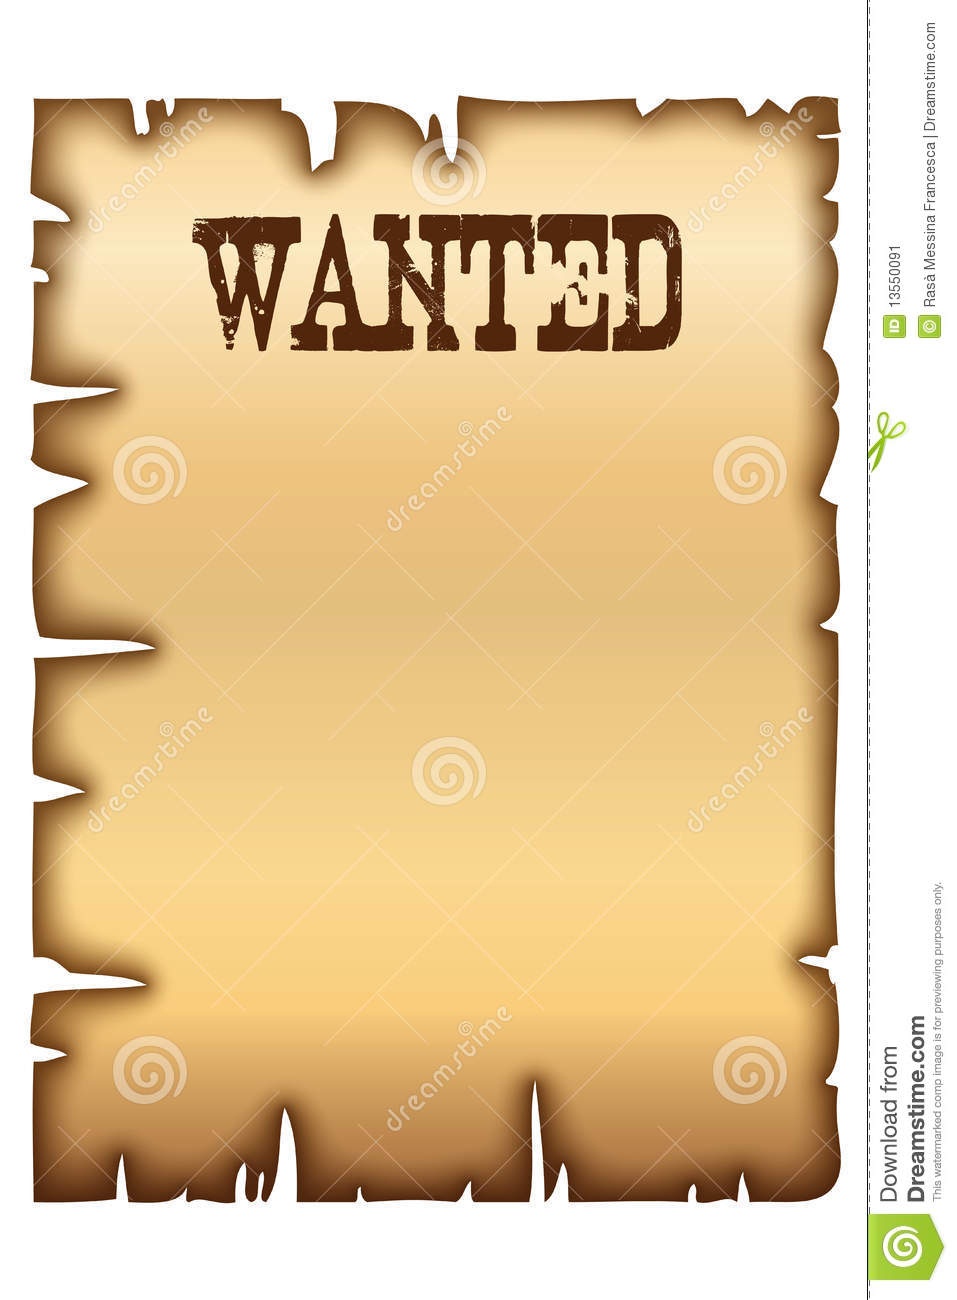 Wanted Poster Stock Vector. Illustration Of Edge, Antique - 13550091 - Wanted Poster Printable Free